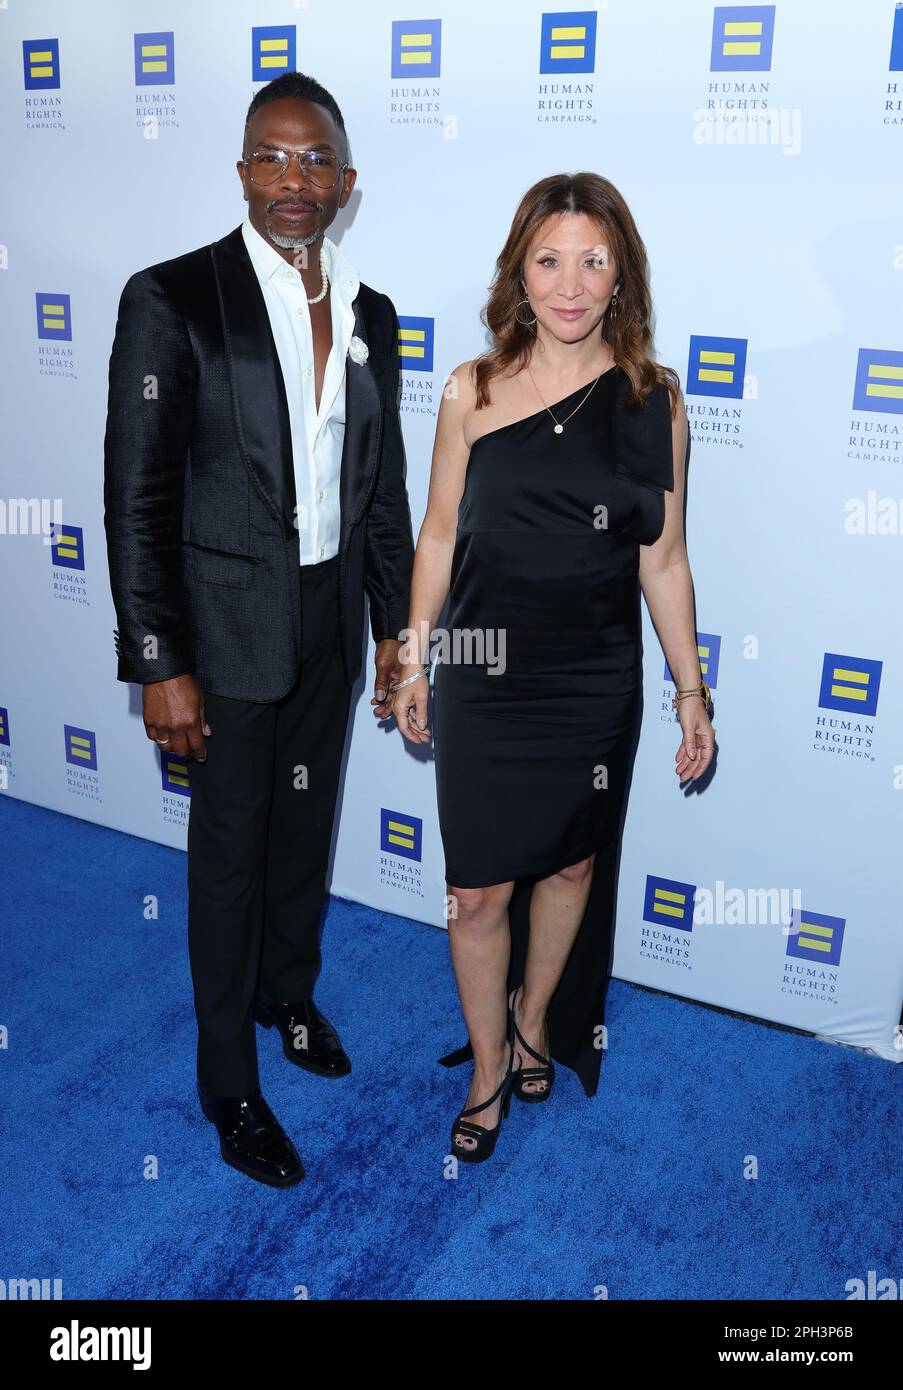 Los Angeles, USA. 25th Mar, 2023. Ron Kellum, Cheri Oteri arrives at The  2023 Human Rights Campaign LA Dinner held at The JW Marriott L.A. Live in  Los Angeles, CA on Saturday